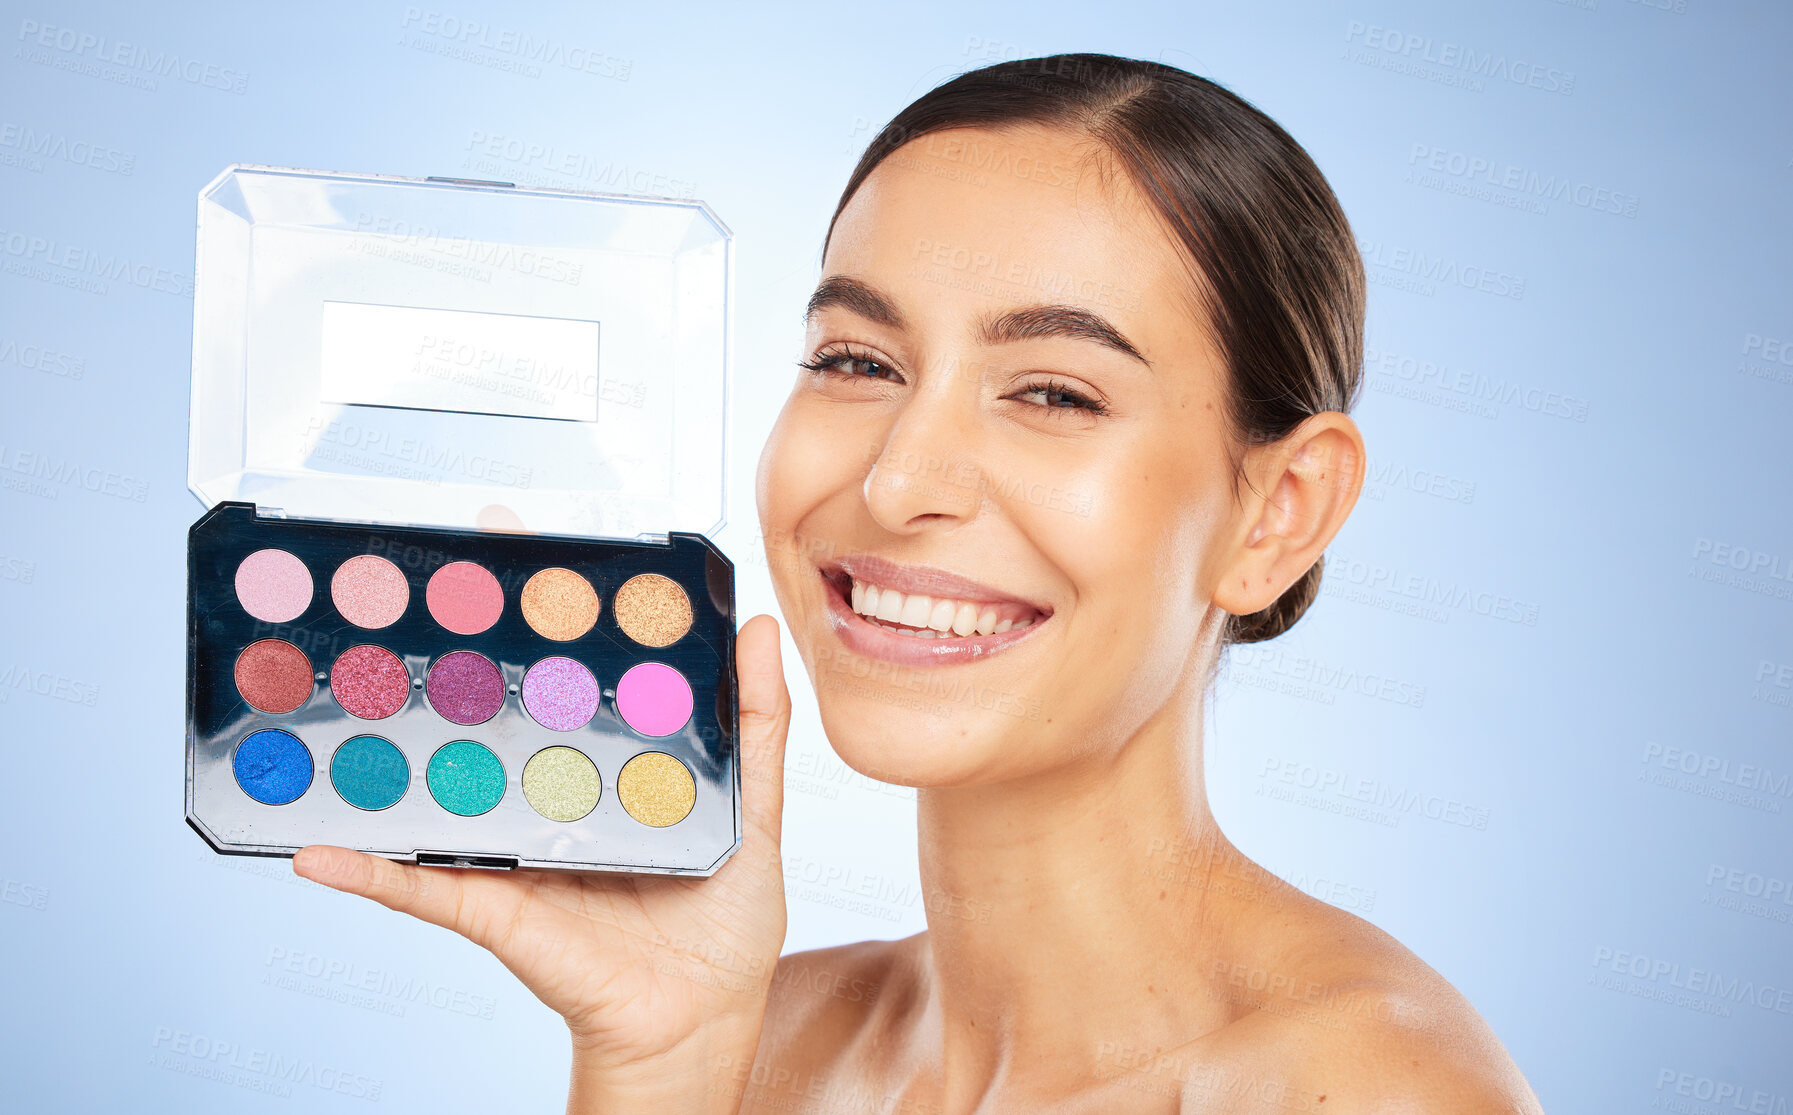 Buy stock photo Beauty, makeup and eye shadow pallet with a model woman in studio on a blue background to apply color. Portrait, face and cosmetics with an attractive young female posing to promote a skin product